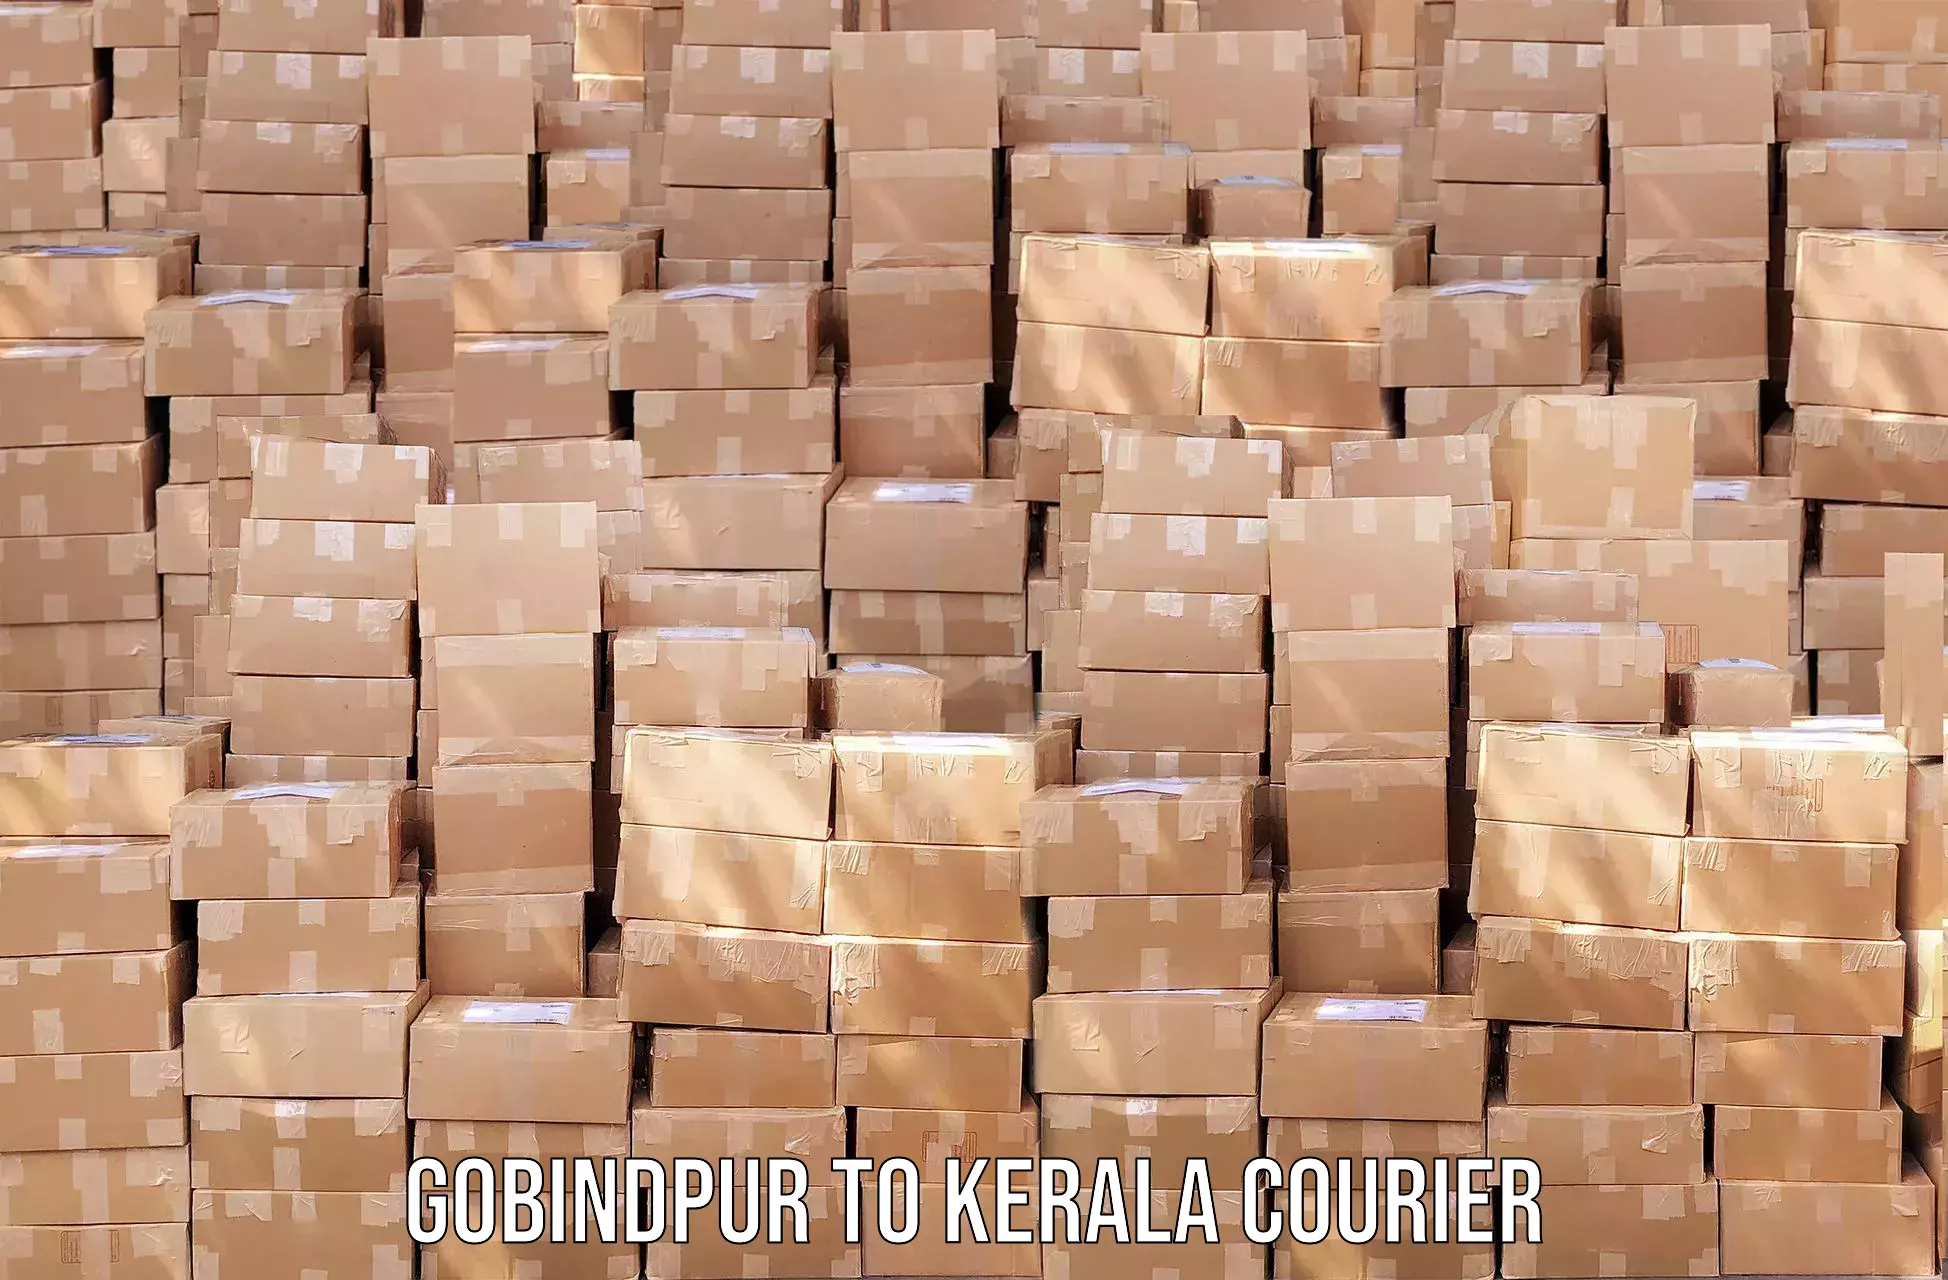 User-friendly delivery service in Gobindpur to Pala